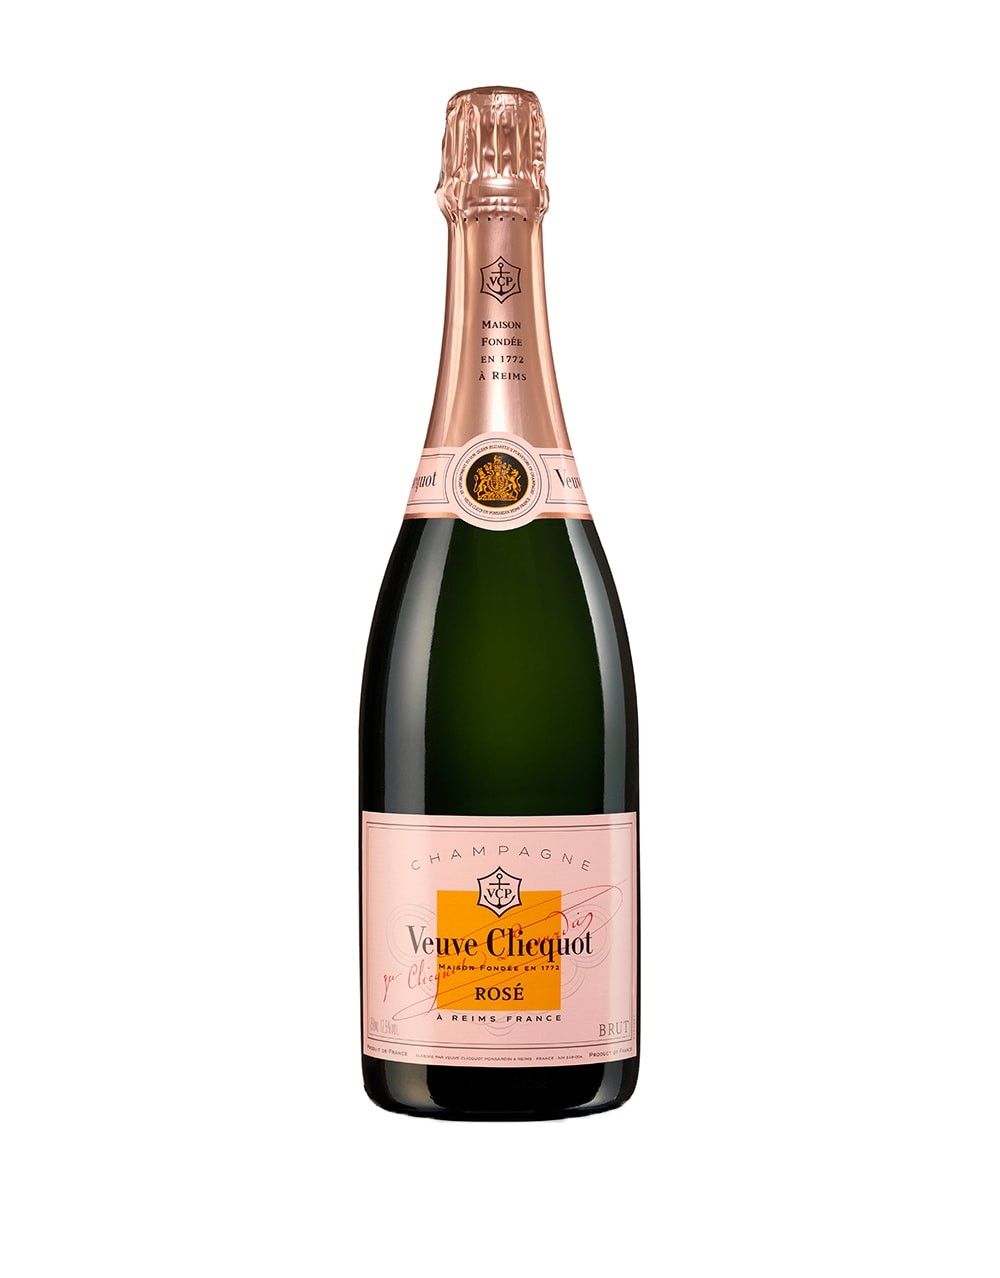 Veuve Clicquot Rosé (750ml) | Buy Online or Send as a Gift